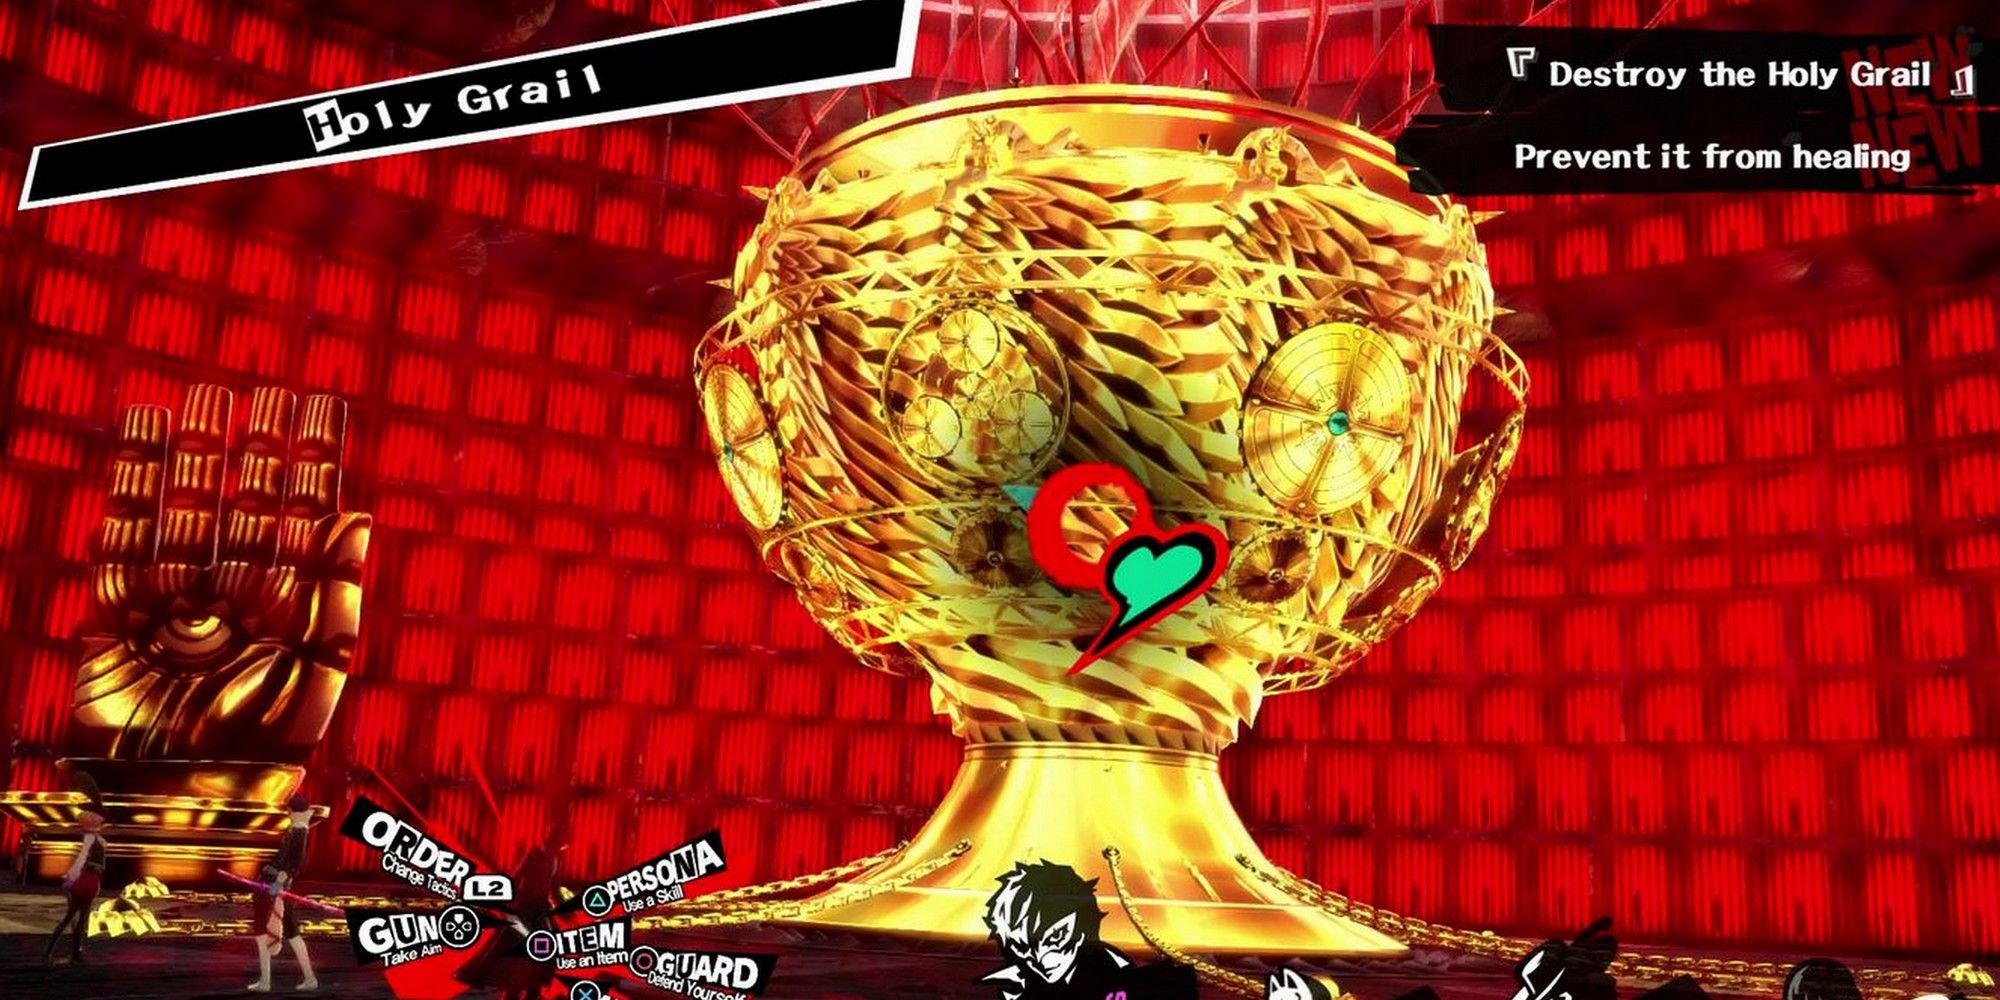 persona 5 royal holy grail second fight thief sent to cut supply line